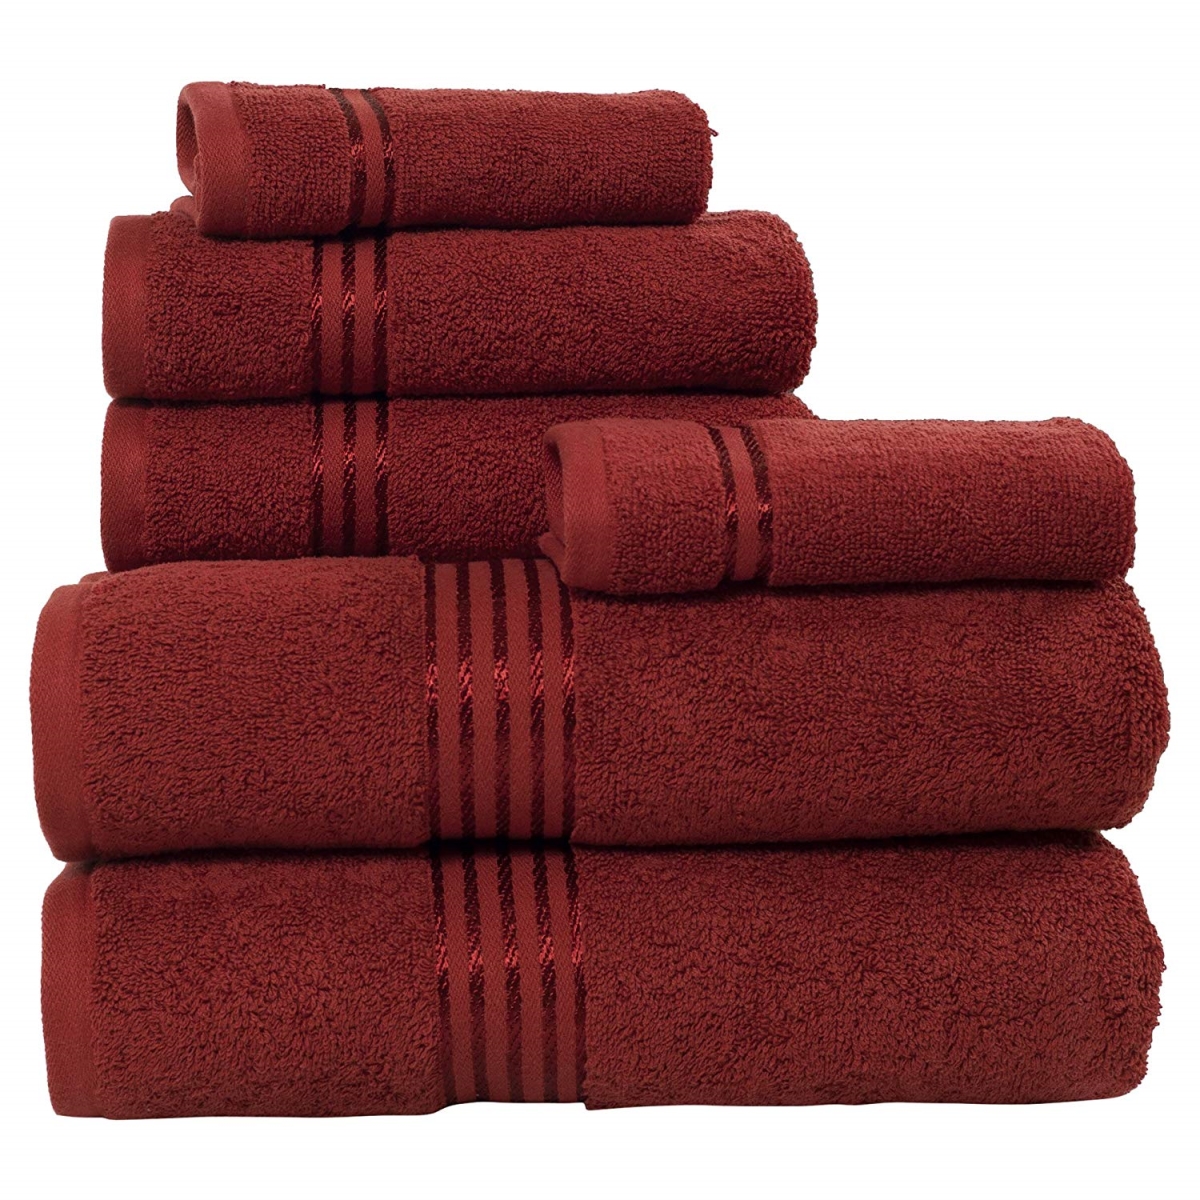 Picture of Bedford Home 67A-01851 100 Percent Cotton Hotel 6 Piece Towel Set - Burgundy